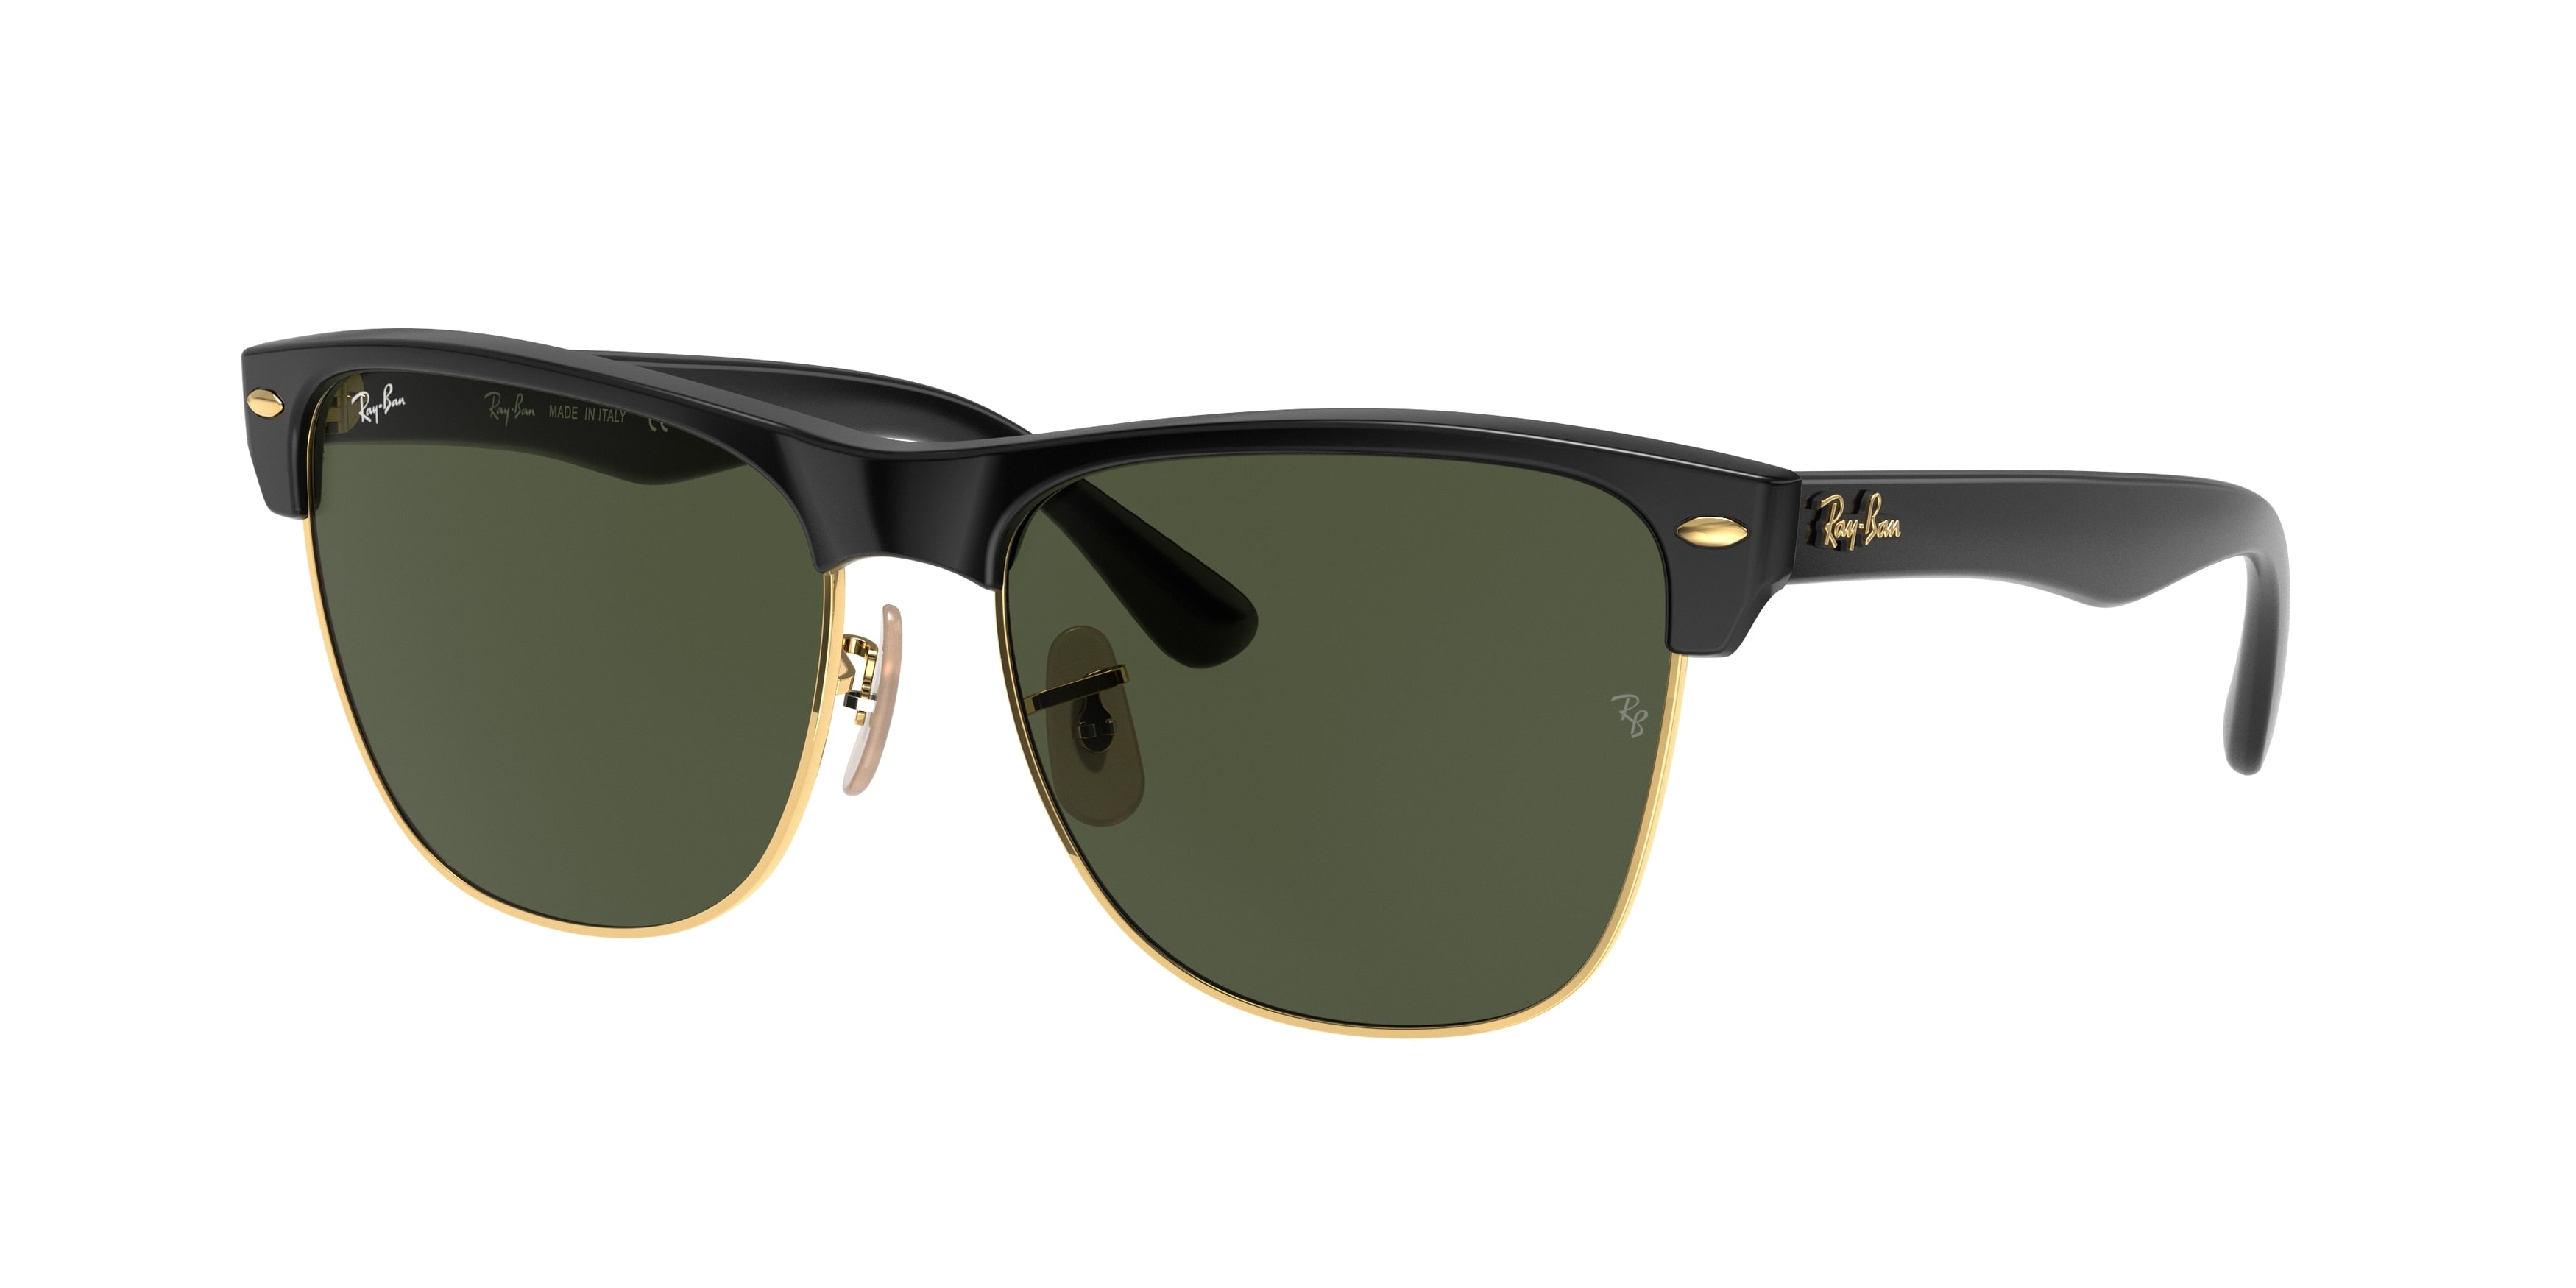 Ray-Ban CLUBMASTER OVERSIZED RB4175 Square Sunglasses  877-Black On Gold 57-145-16 - Color Map Black